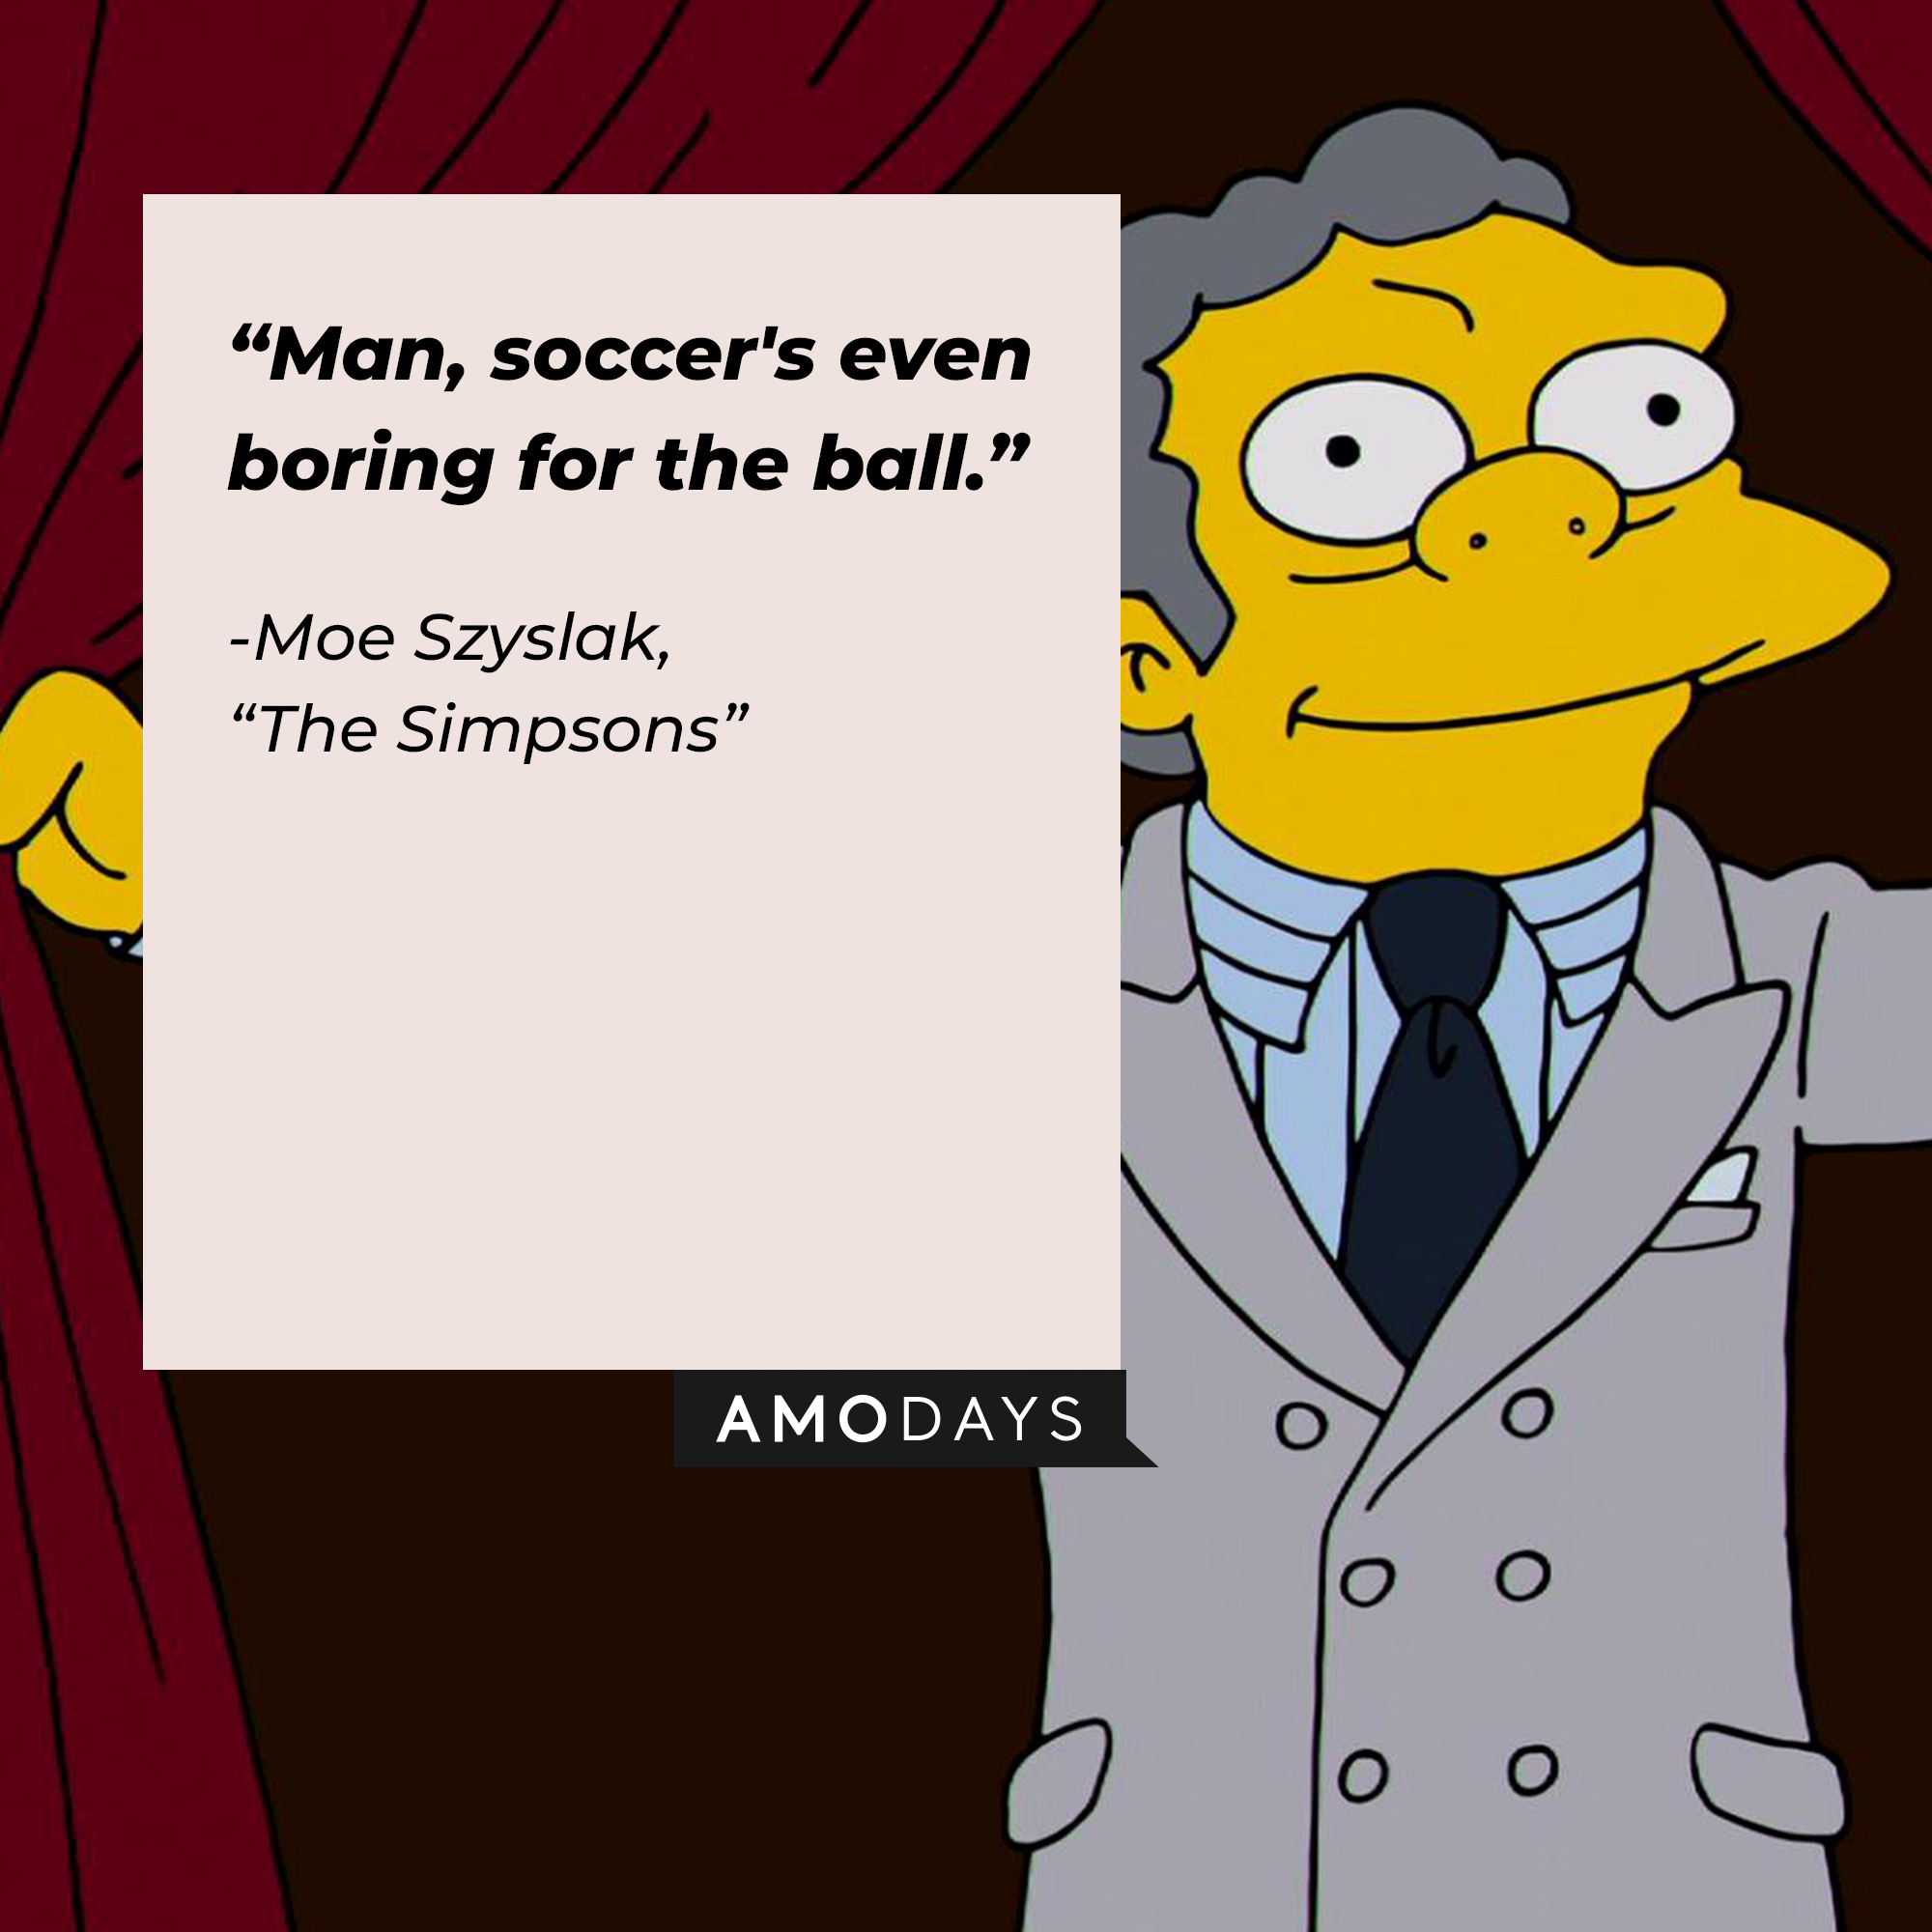 Image of Moe Szyslak with his quote from "The Simpsons:" “Man, soccer's even boring for the ball." | Source: Facebook.com/TheSimpsons